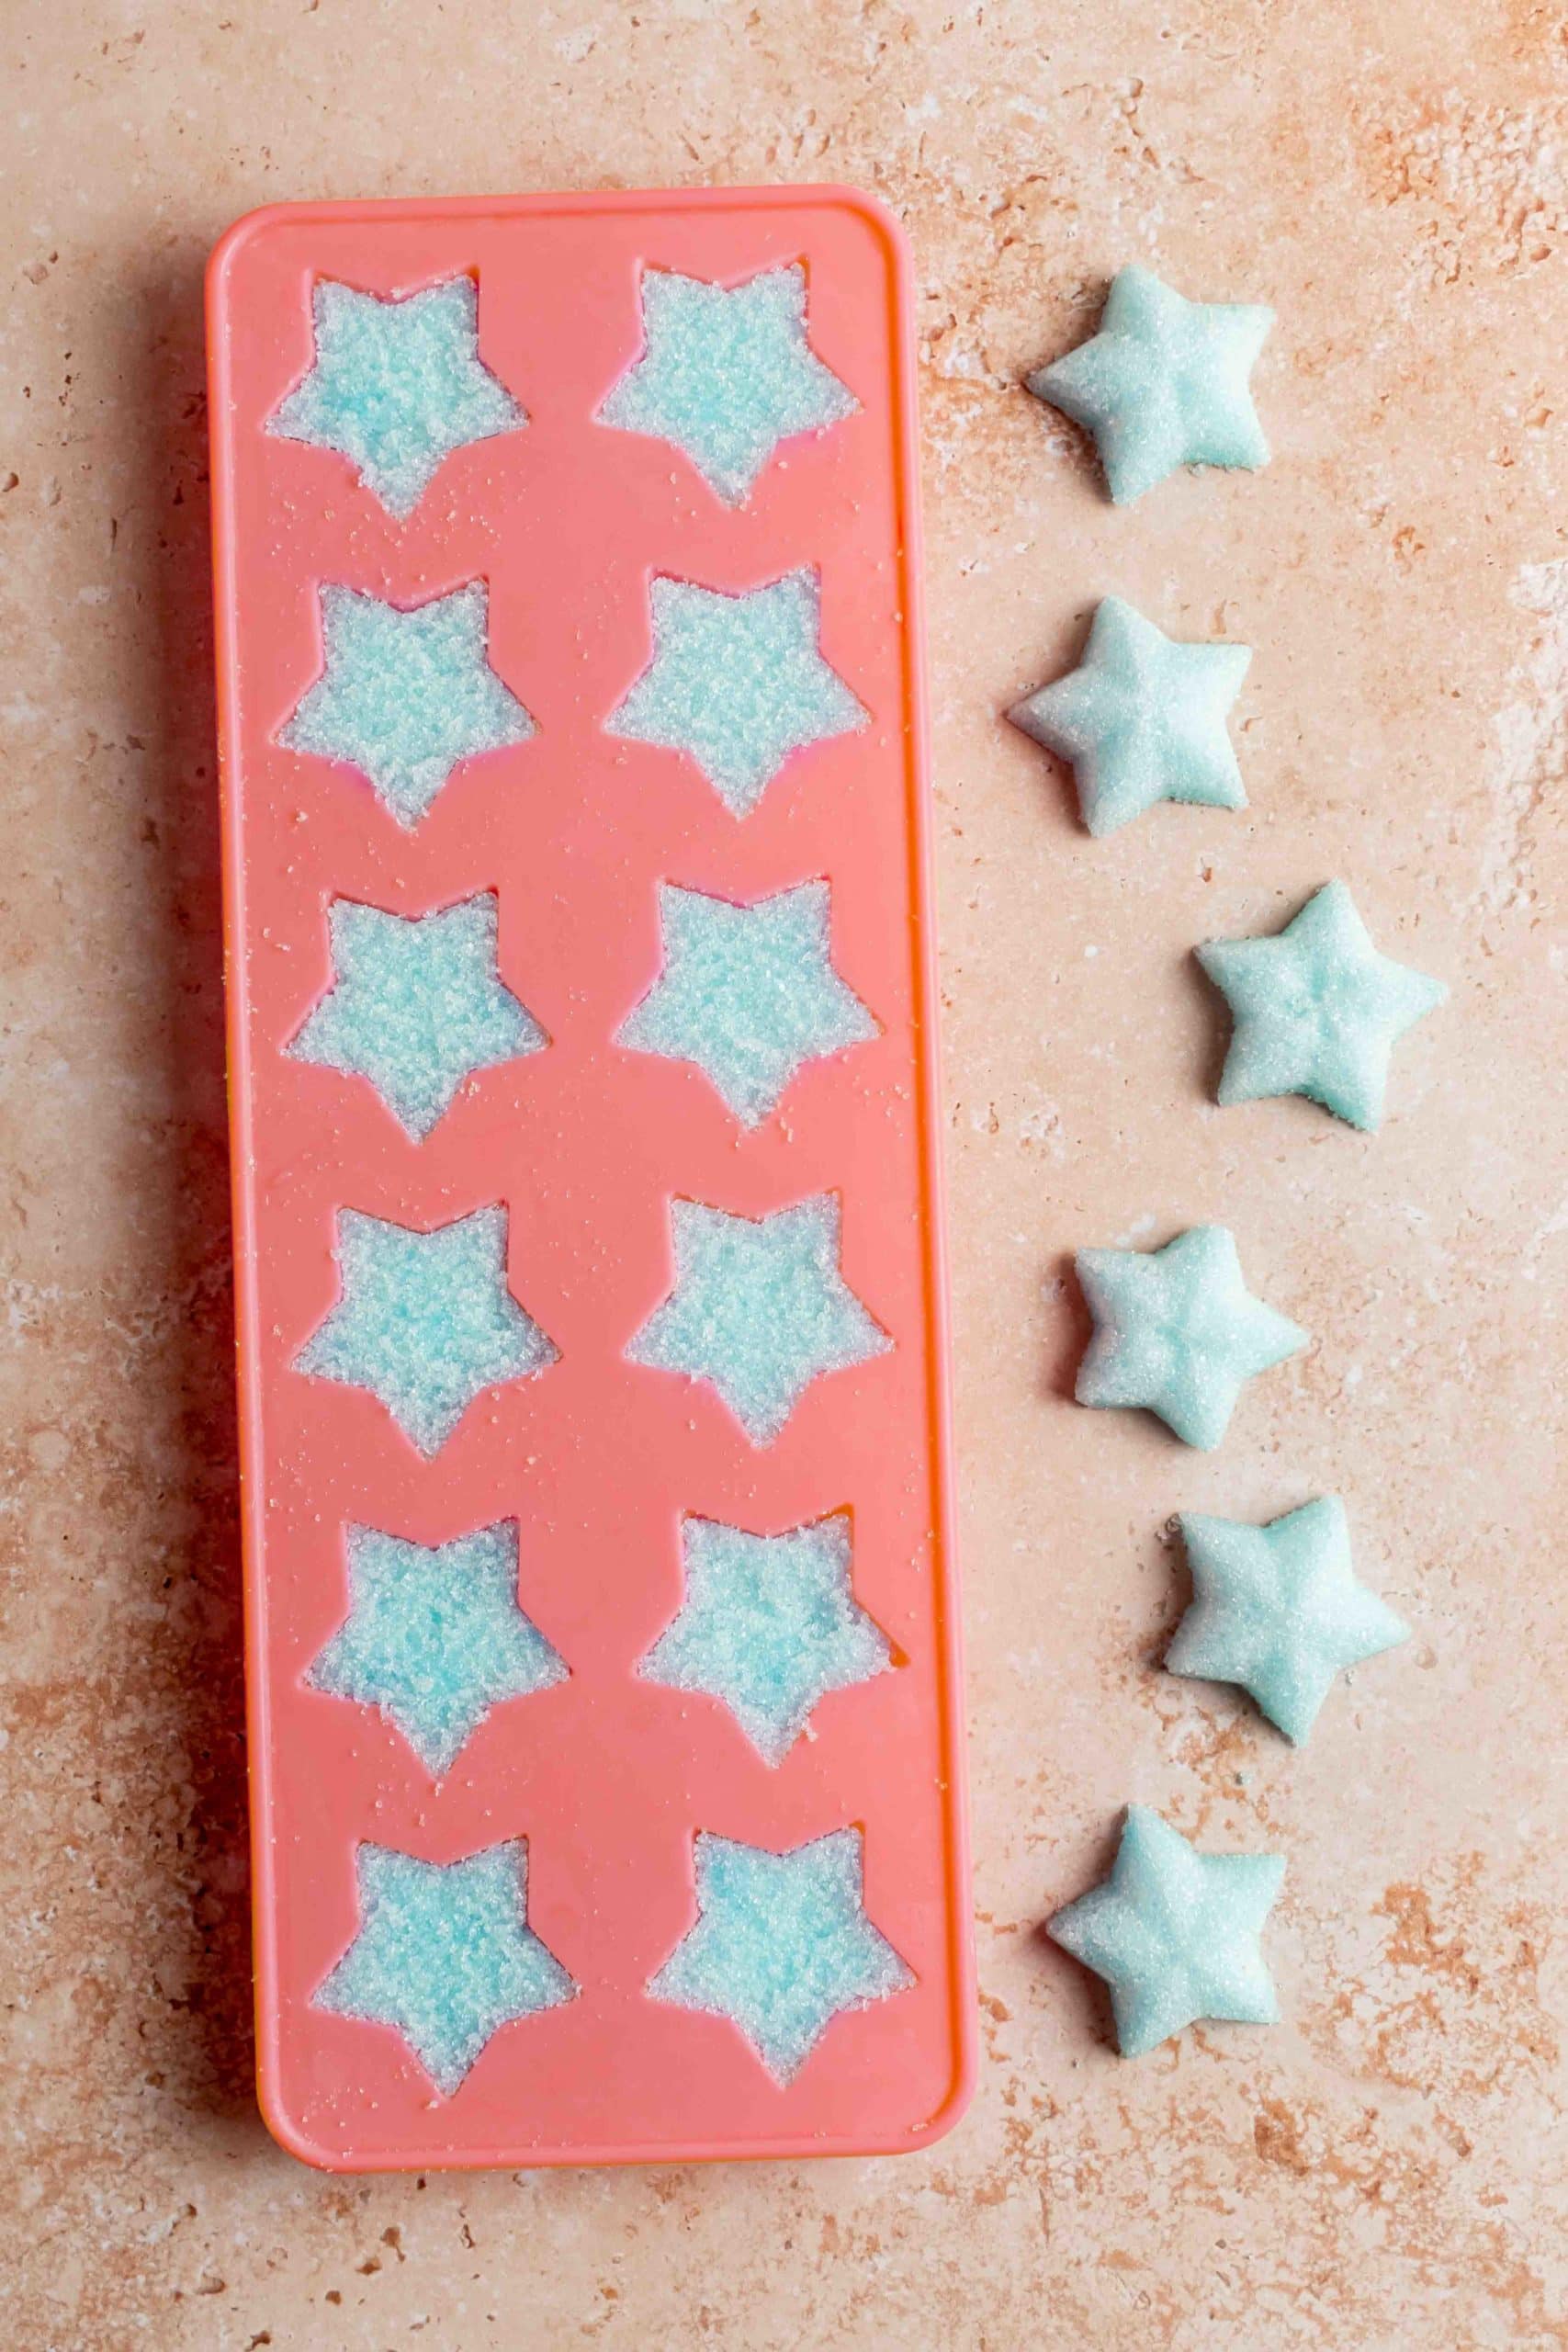 star mold with curacao flavored sugar